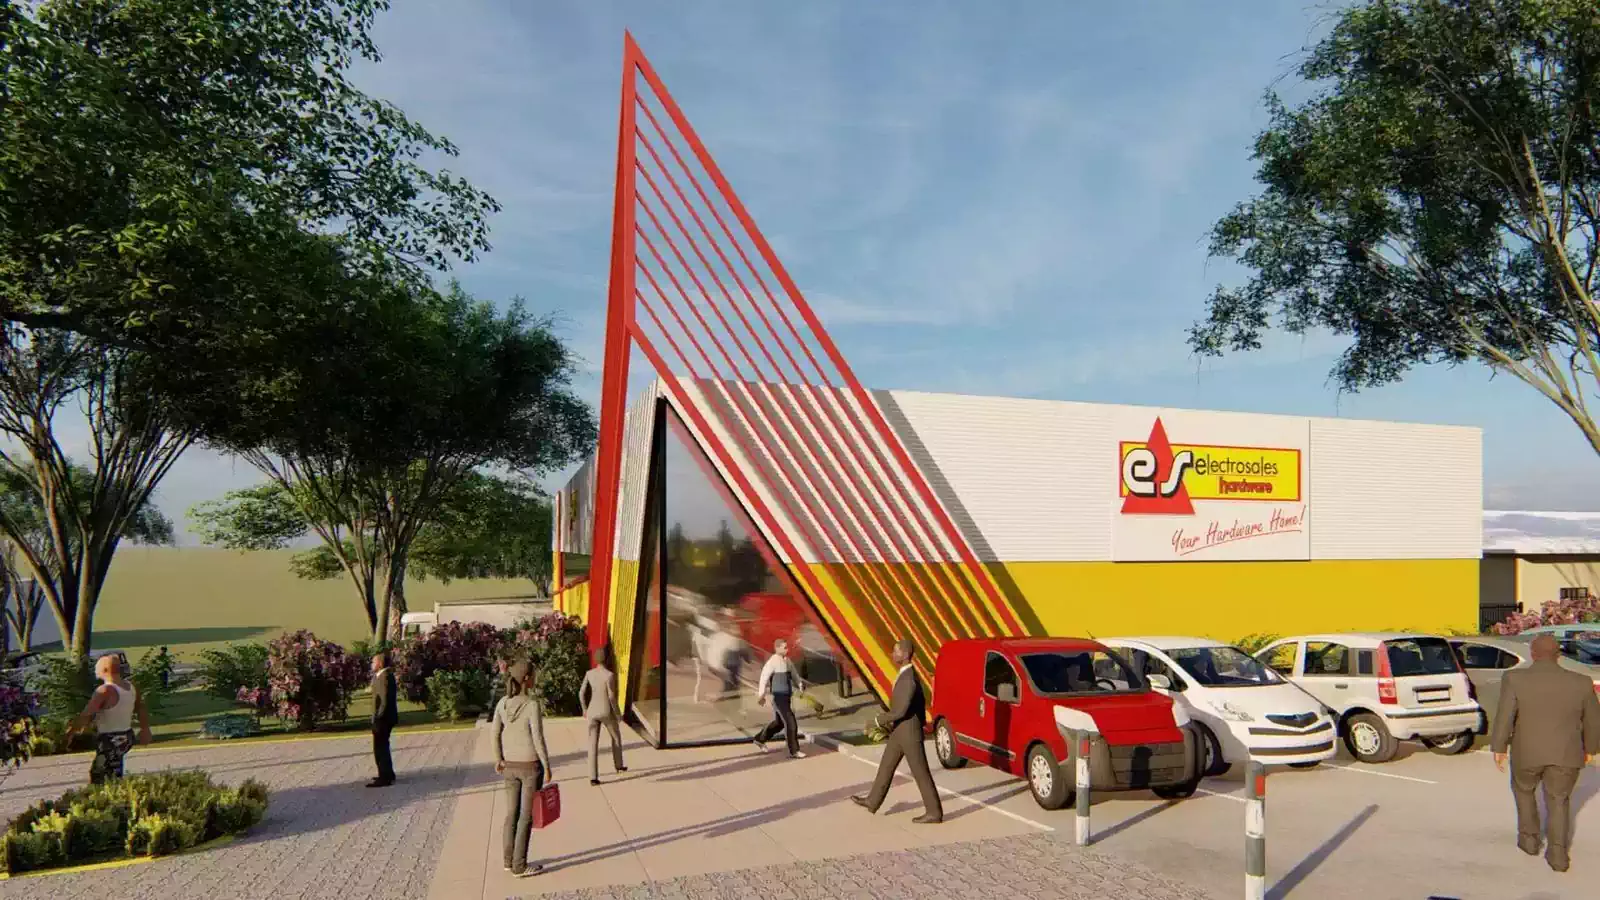 Distinctive Electrosales branded warehouse shop with metal red structure designed by Harare architect